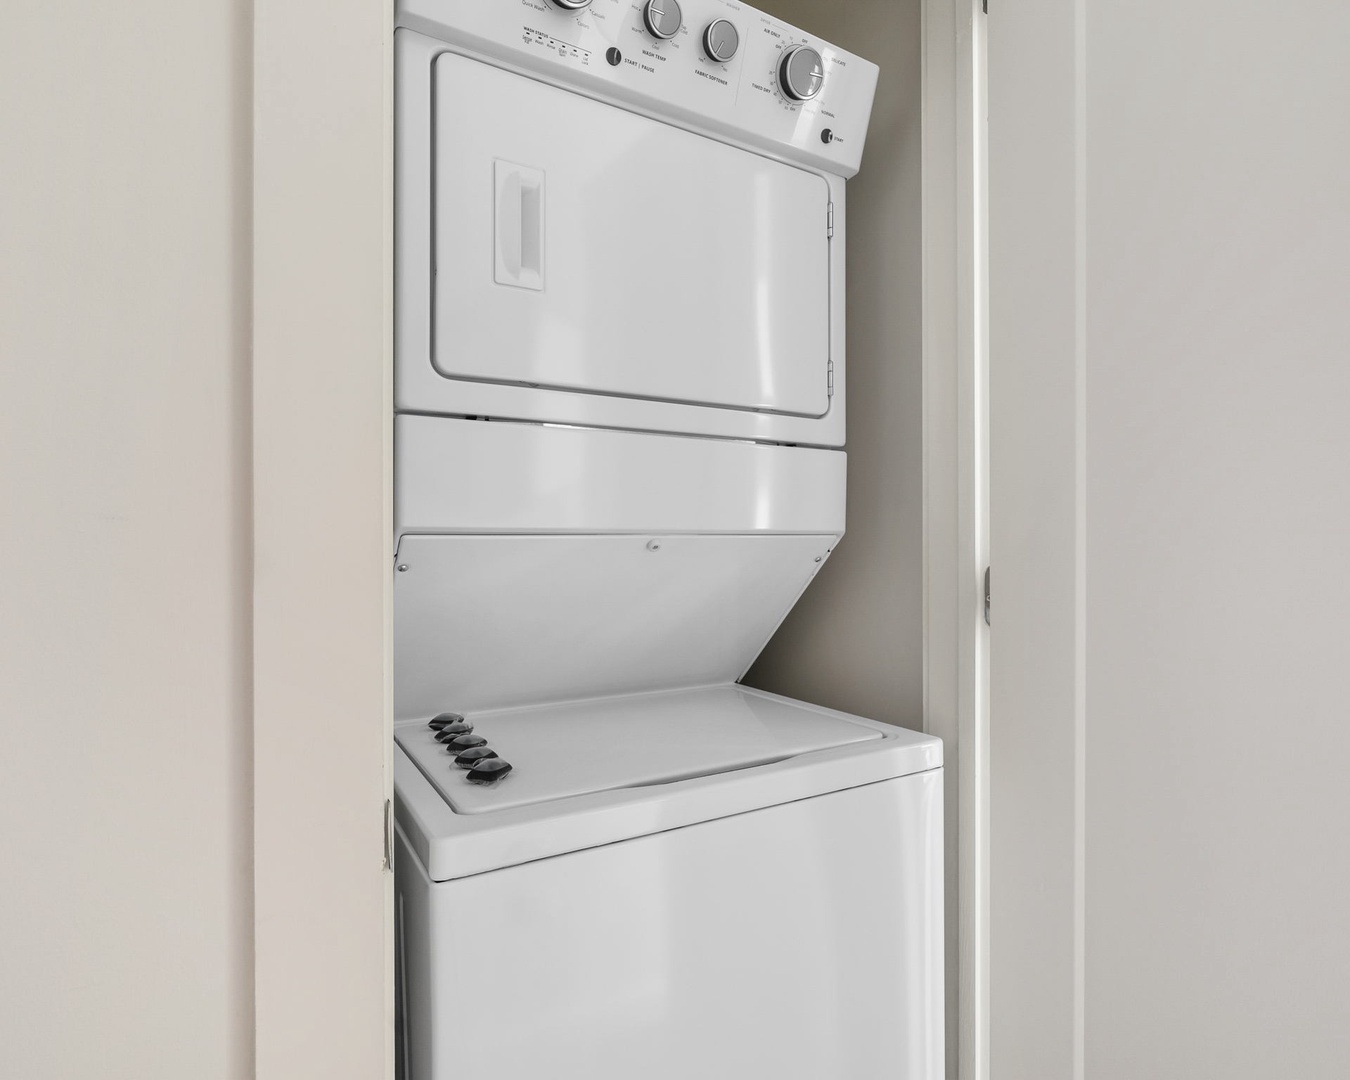 Take care of laundry with our in-unit washer and dryer, steam iron, and ironing board